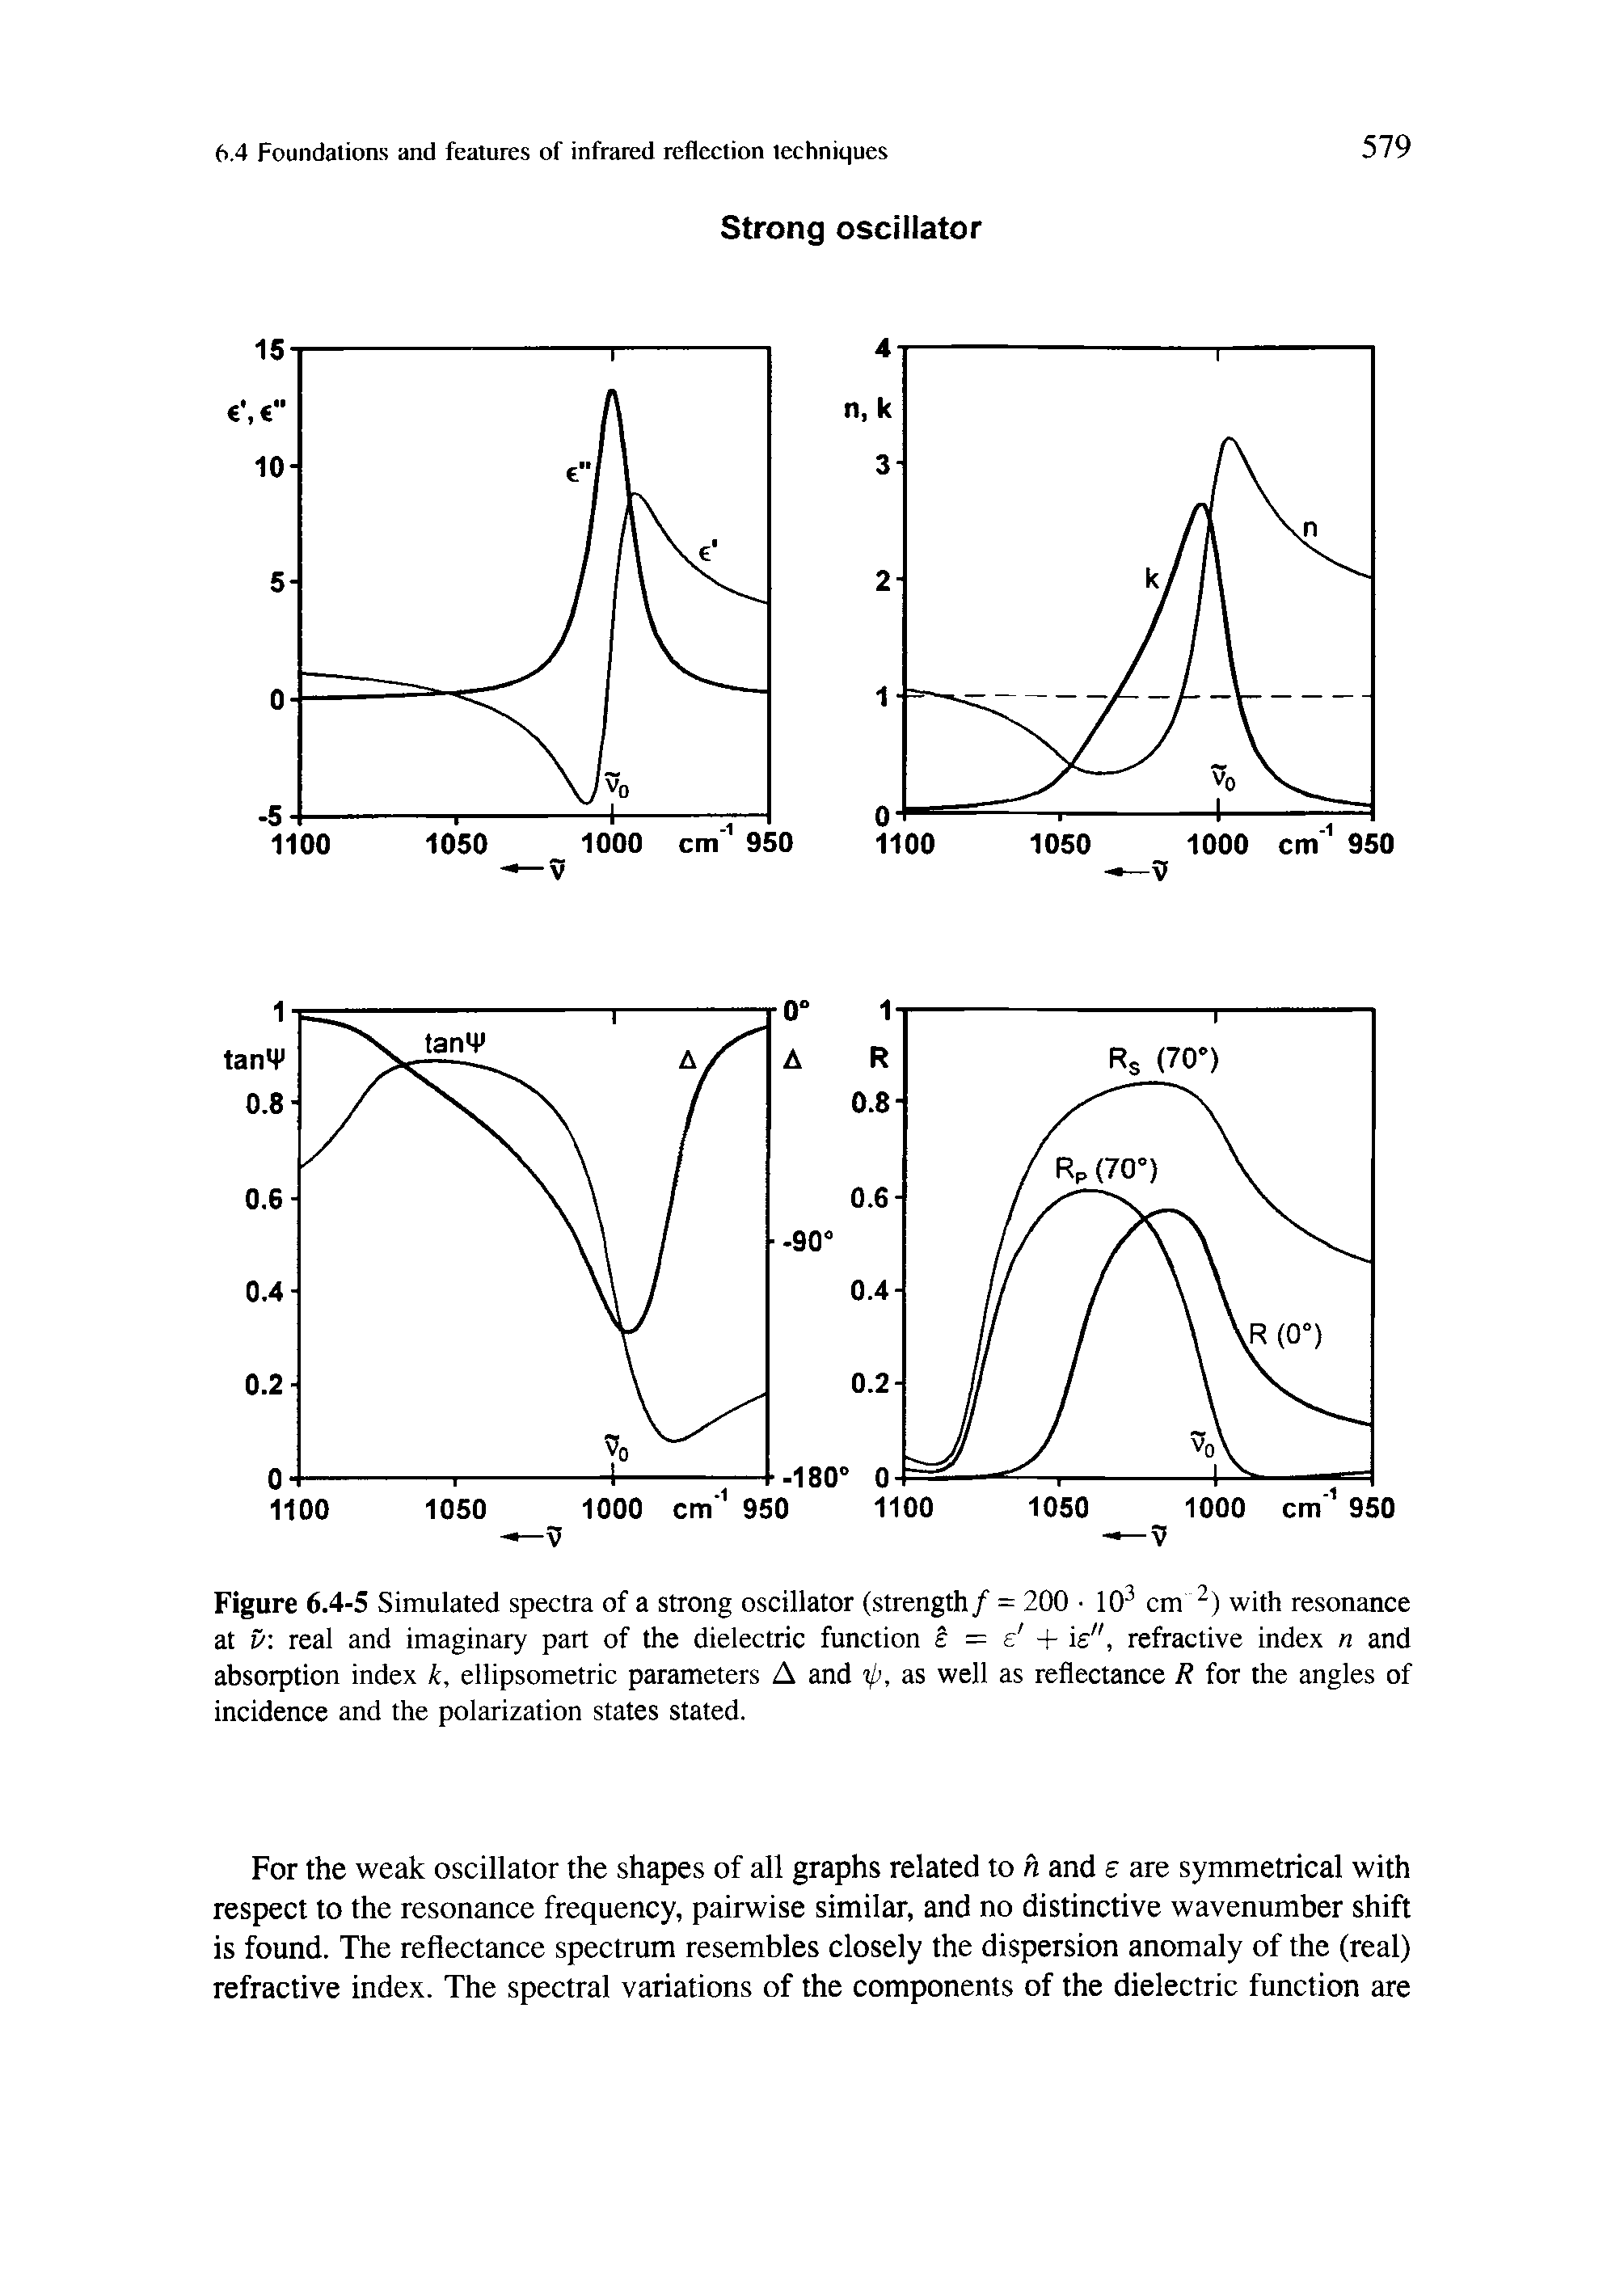 Figure 6.4-5 Simulated spectra of a strong oscillator (strength/ = 200 10 cm with resonance at t> real and imaginary part of the dielectric function = s + k", refractive index n and absorption index k, ellipsometric parameters A and ip, as well as reflectance R for the angles of incidence and the polarization states stated.